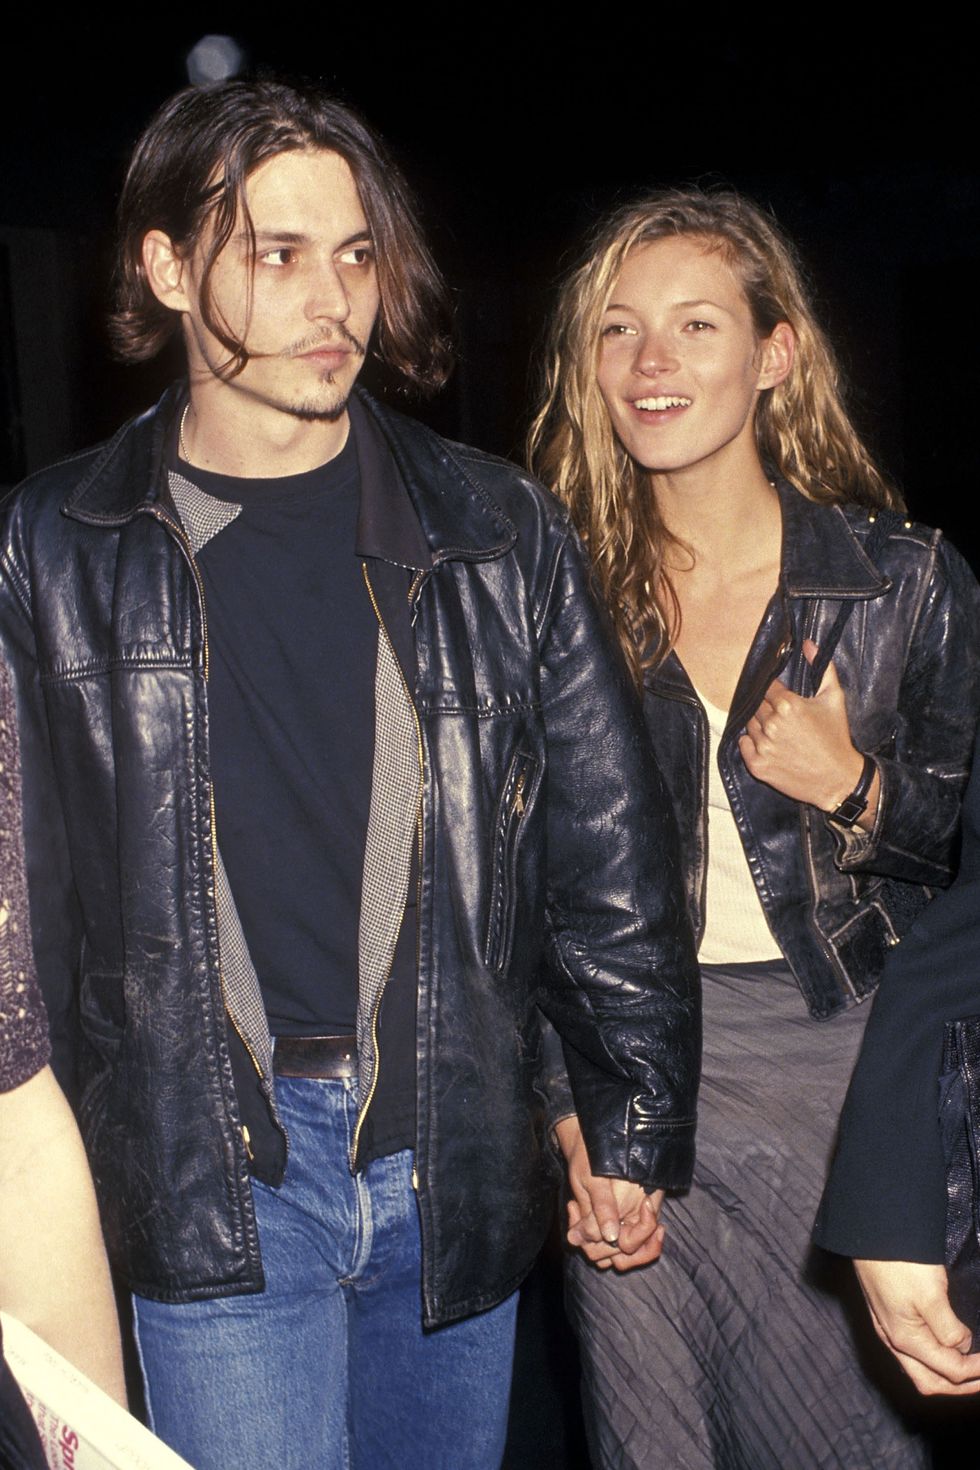 culver city,ca   february 22   actor johnny depp and model kate moss attend the richard tyler's new fashion collection and screening of johnny depp's directorial debut of short film "banter" to benefit the drug abuse resistance education dare on february 22, 1994 at smashbox studios in culver city, california photo by ron galella, ltdron galella collection via getty images